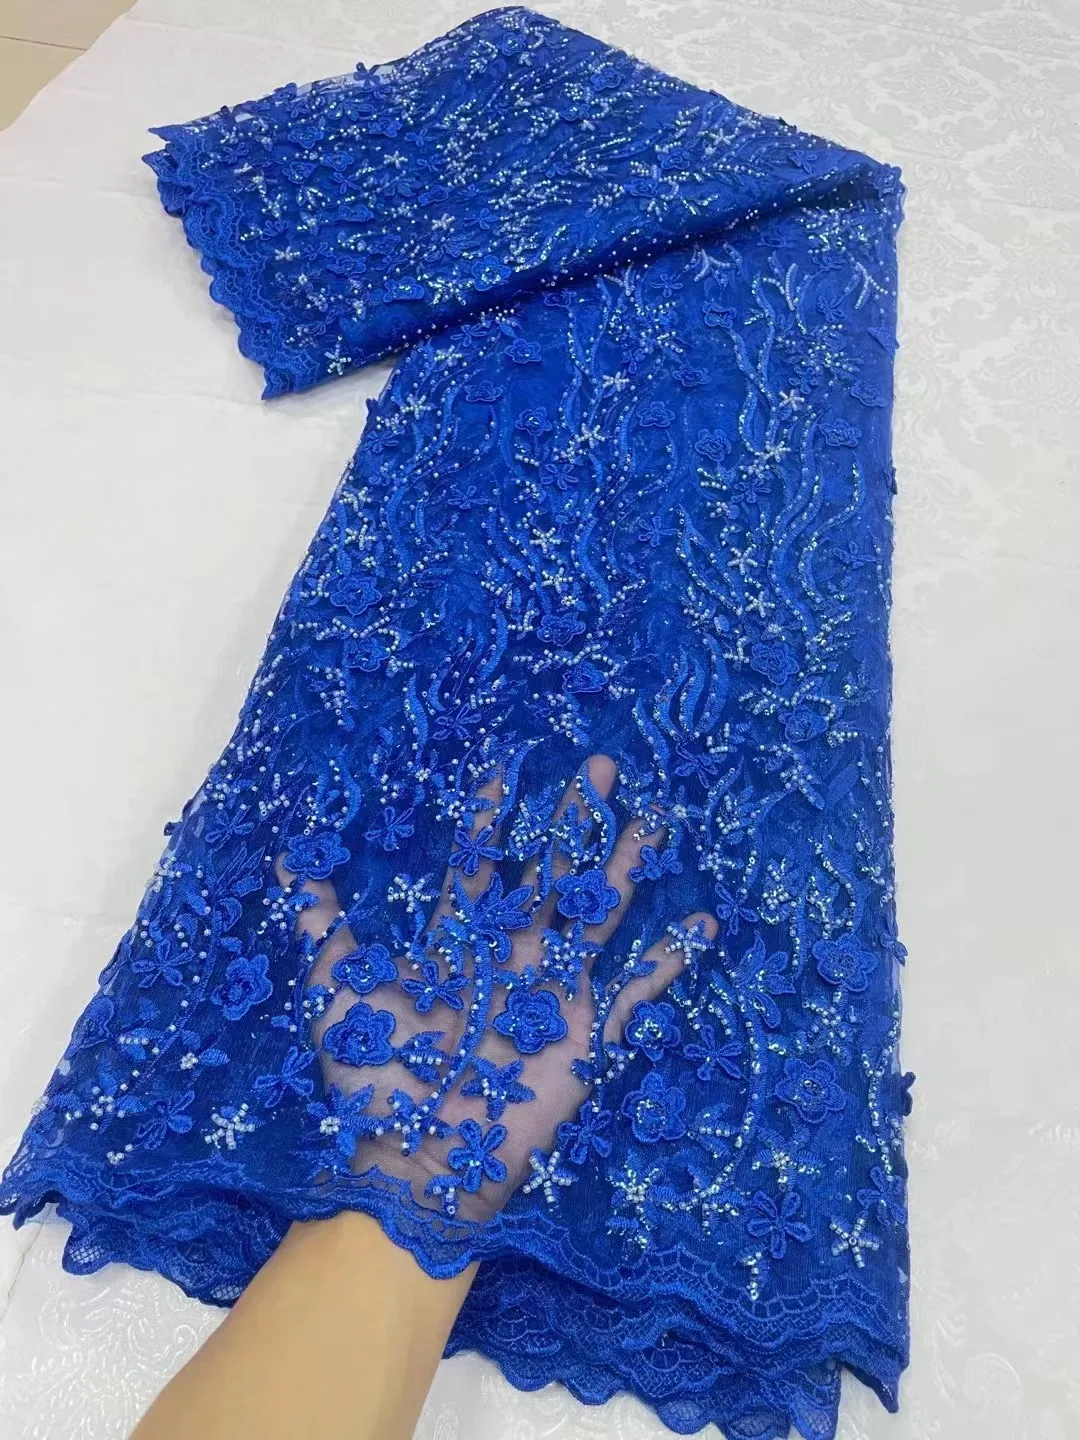 

RoyalBlue Luxury African Heavy Beaded Lace Fabric High Quality 5 Yards Nigerian Sequins Tulle 3D Fabric Material For Wedding